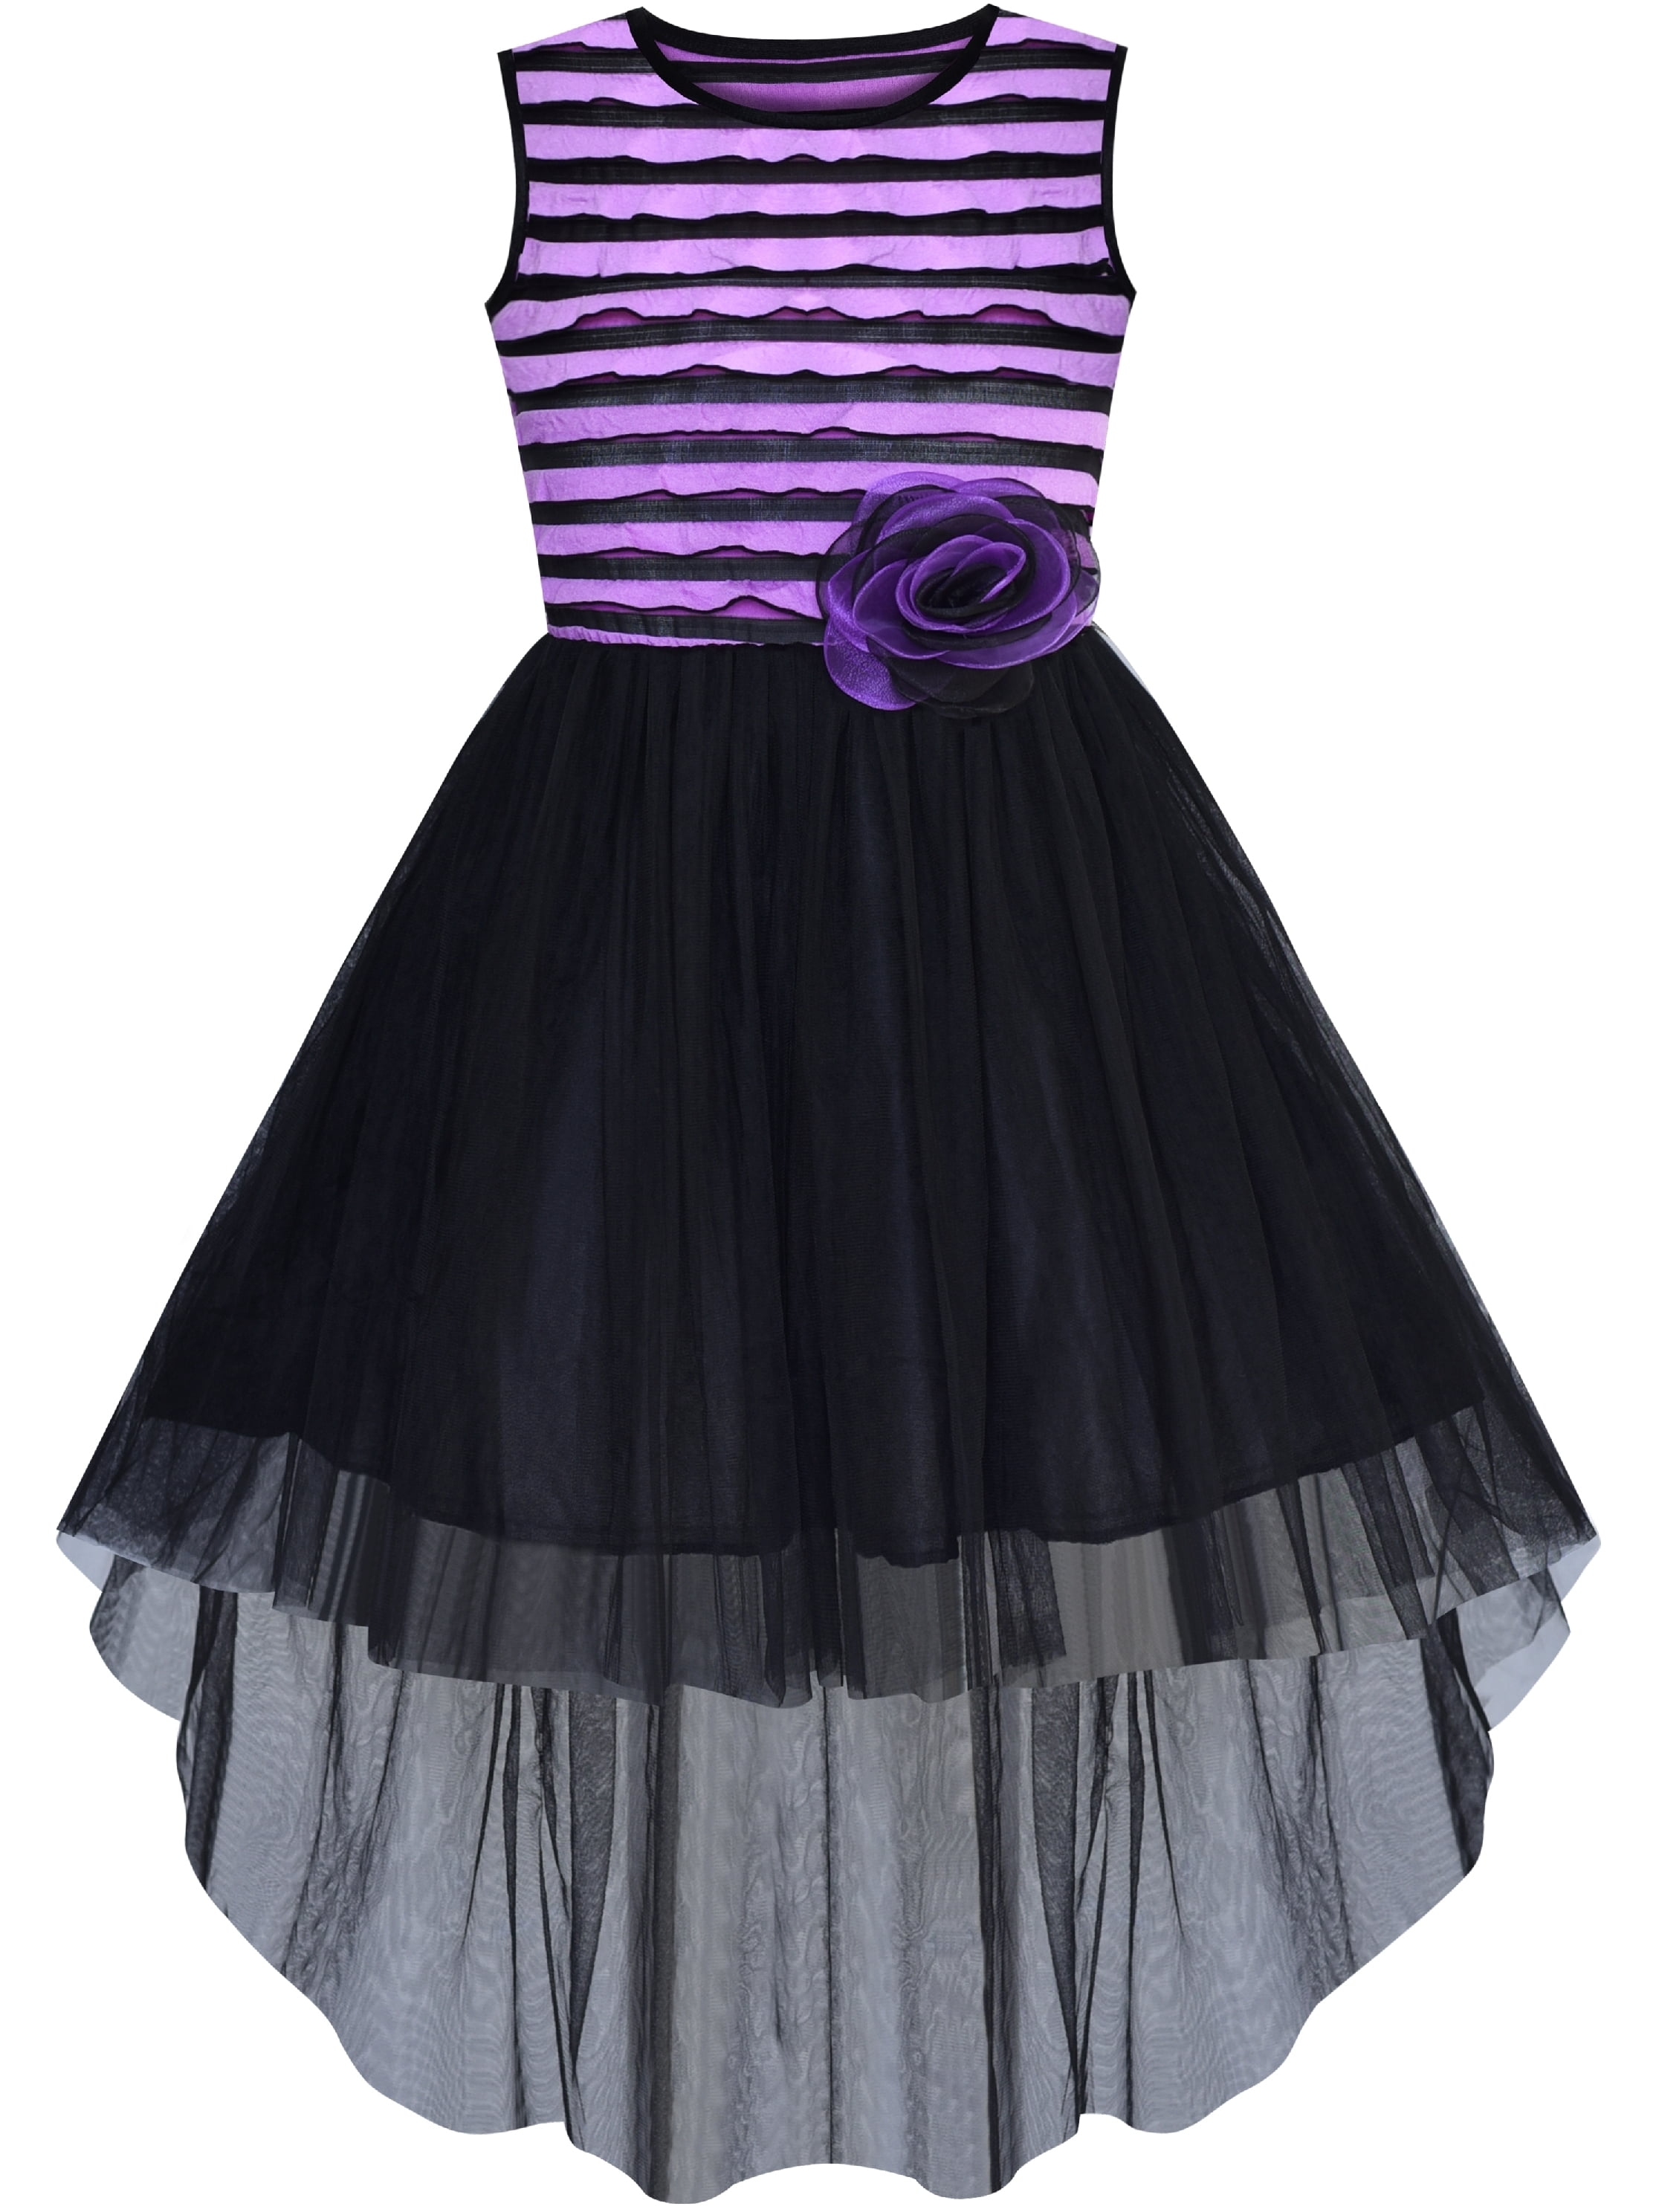 Purple Dress with purple letters Purple tutu dress /'wild one/' and purple tutu for girls or toddlers Sofia the first